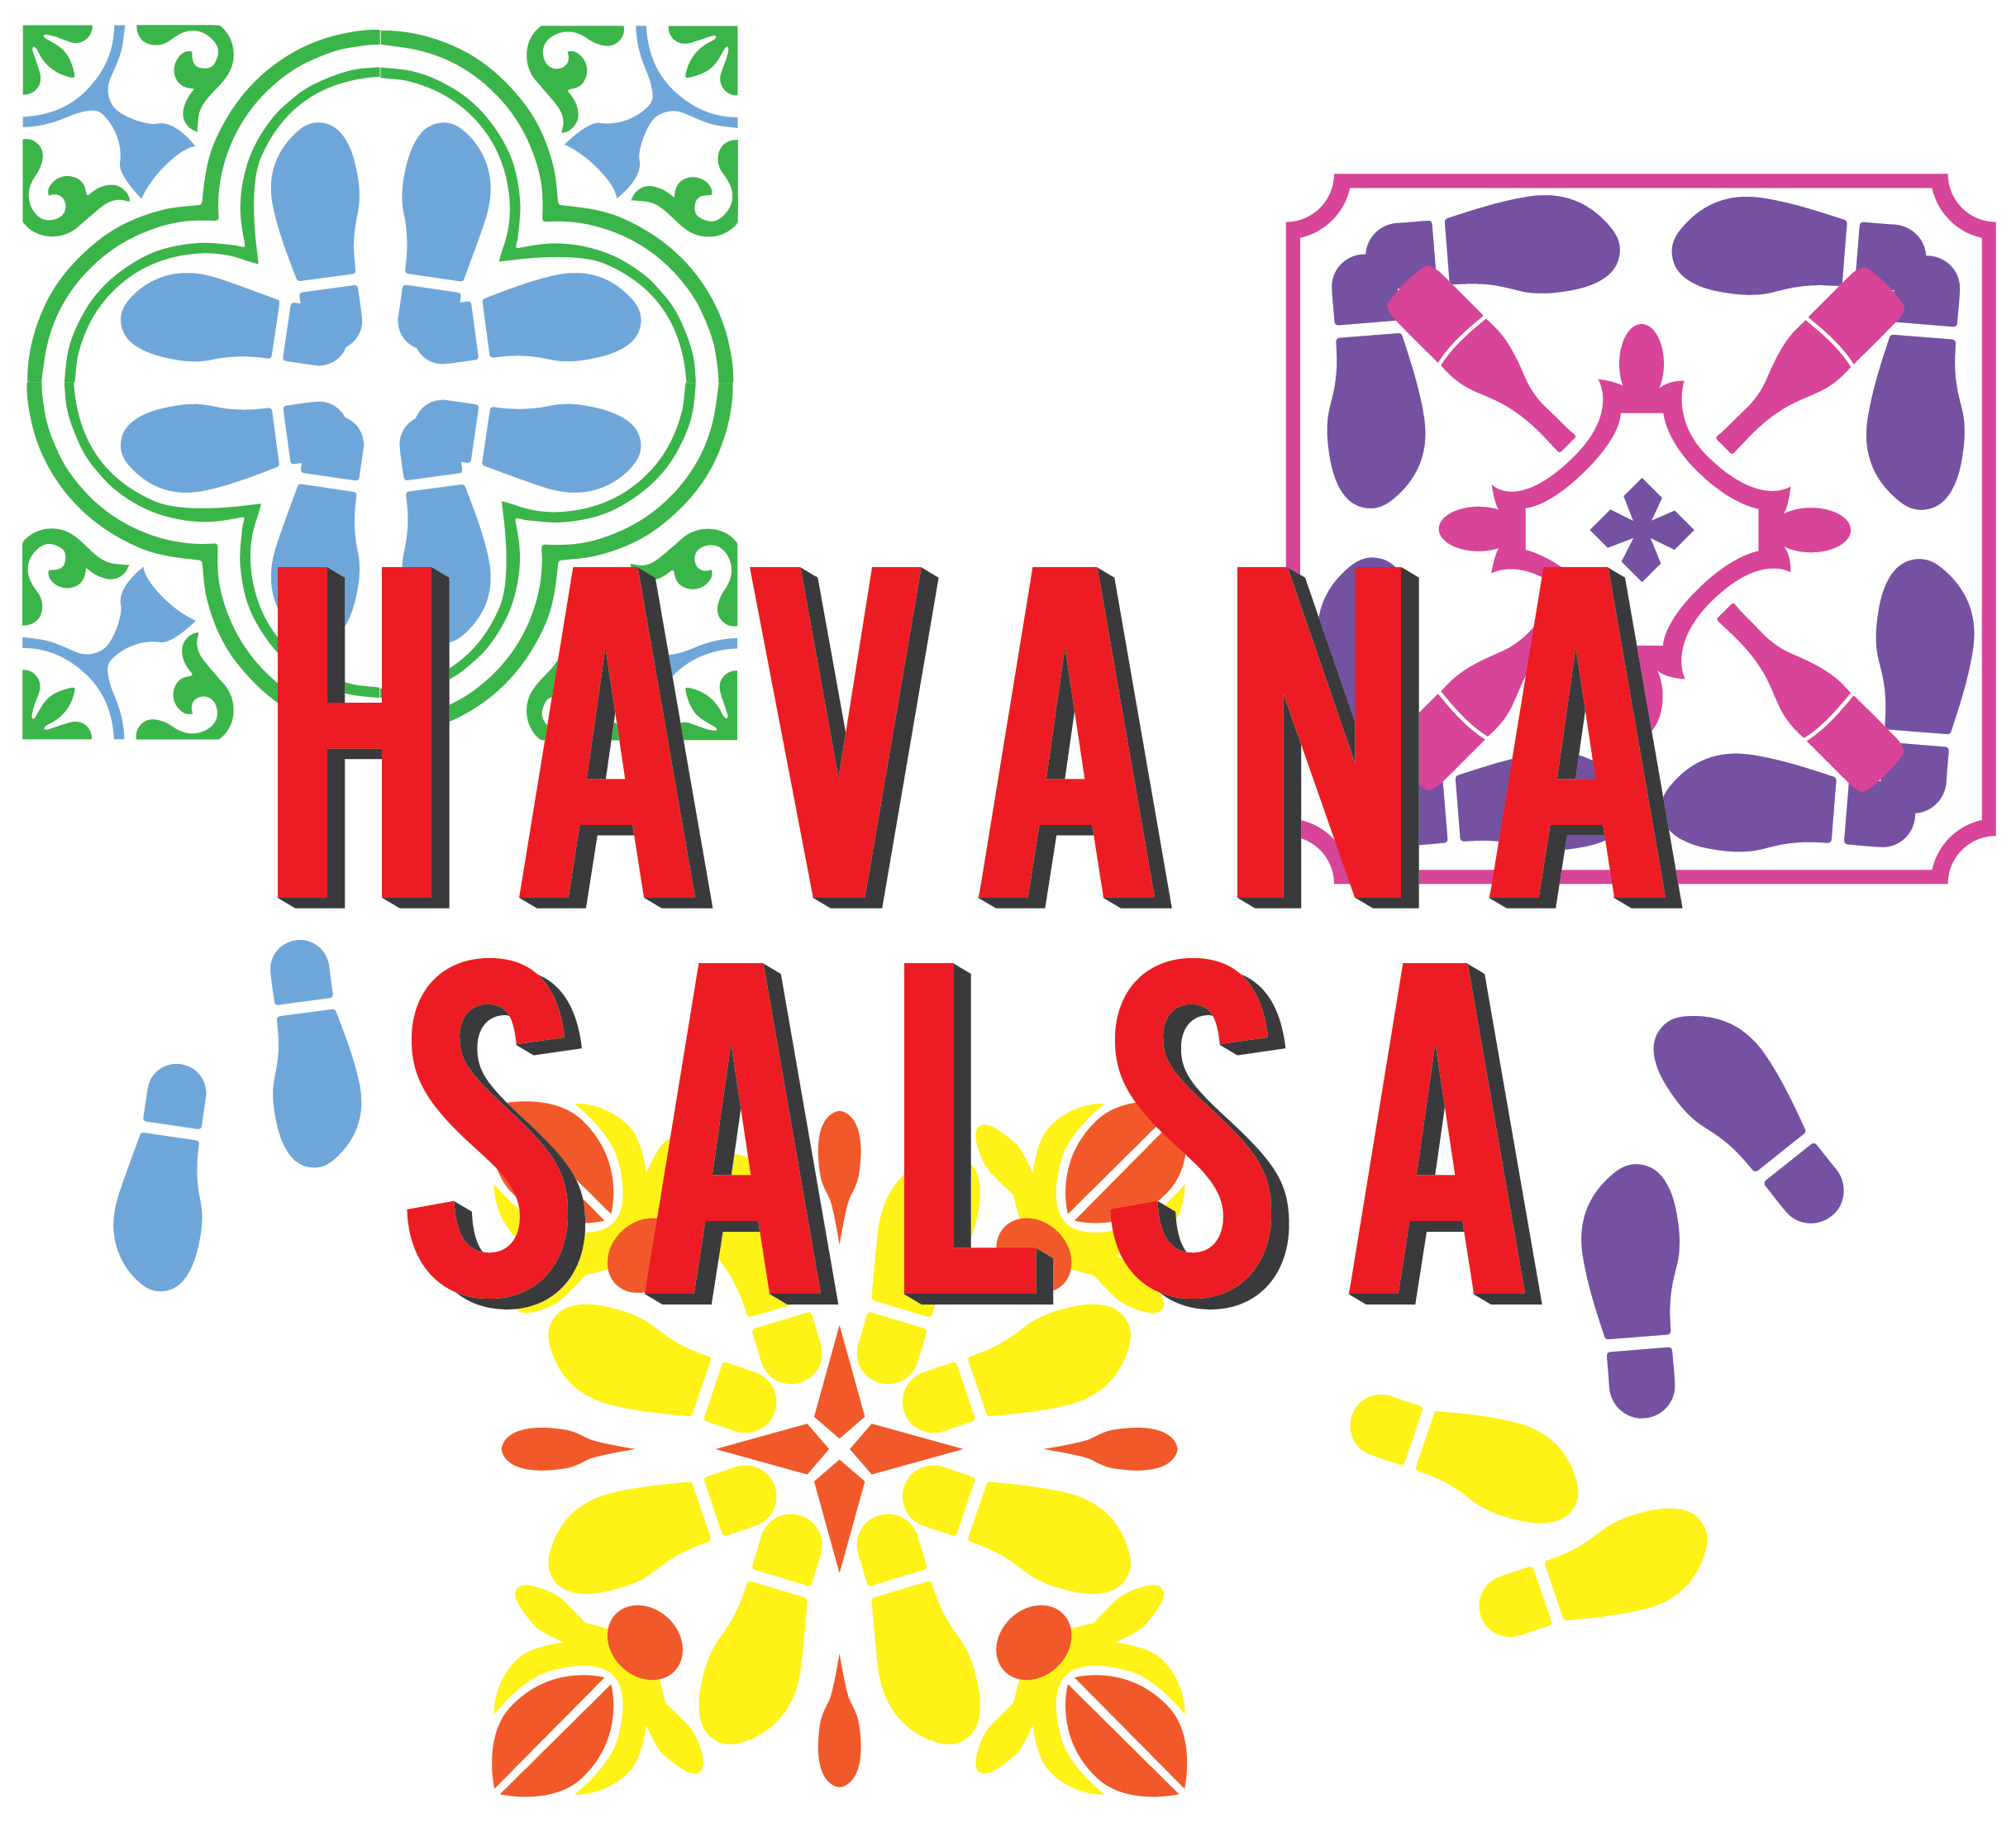 Logo design for Havana Salsa Bar and Dance School by Dan De'ath. Havana Salsa is in red over a white background with colourful tile designs.